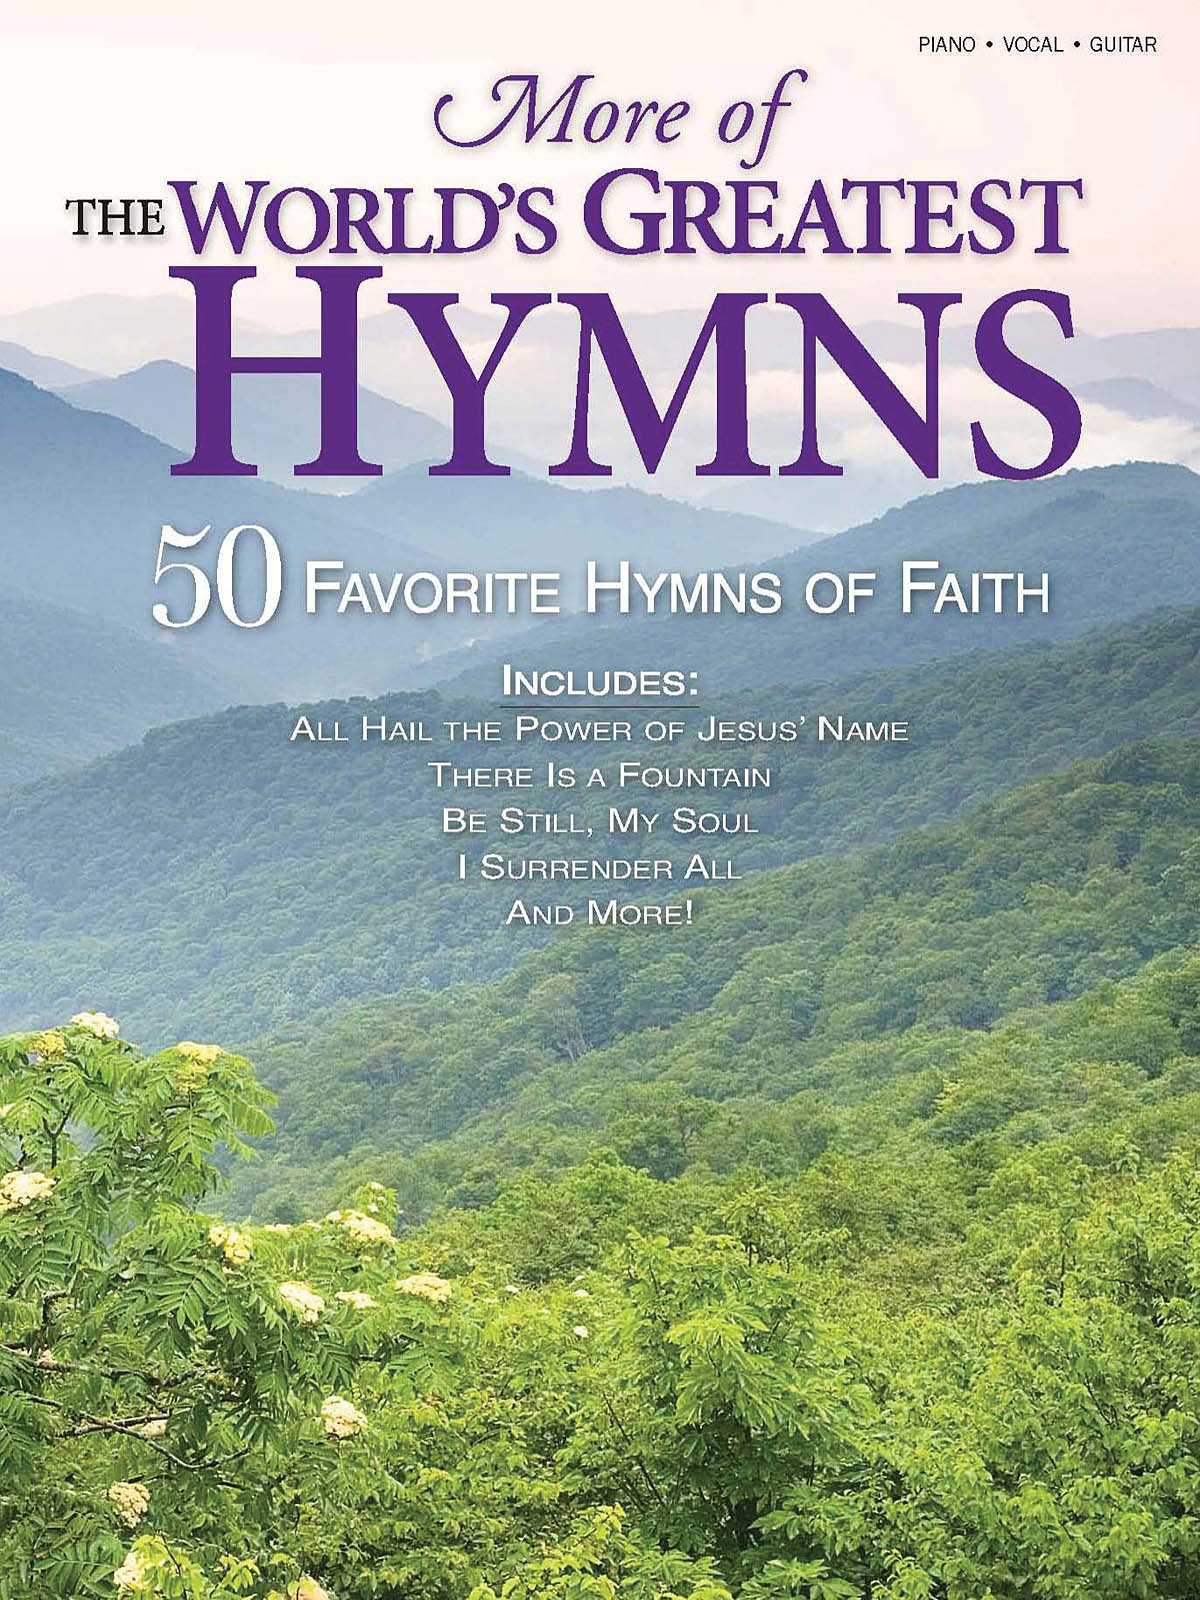 More of the World's Greatest Hymns: Piano  Vocal  Guitar: Vocal Album